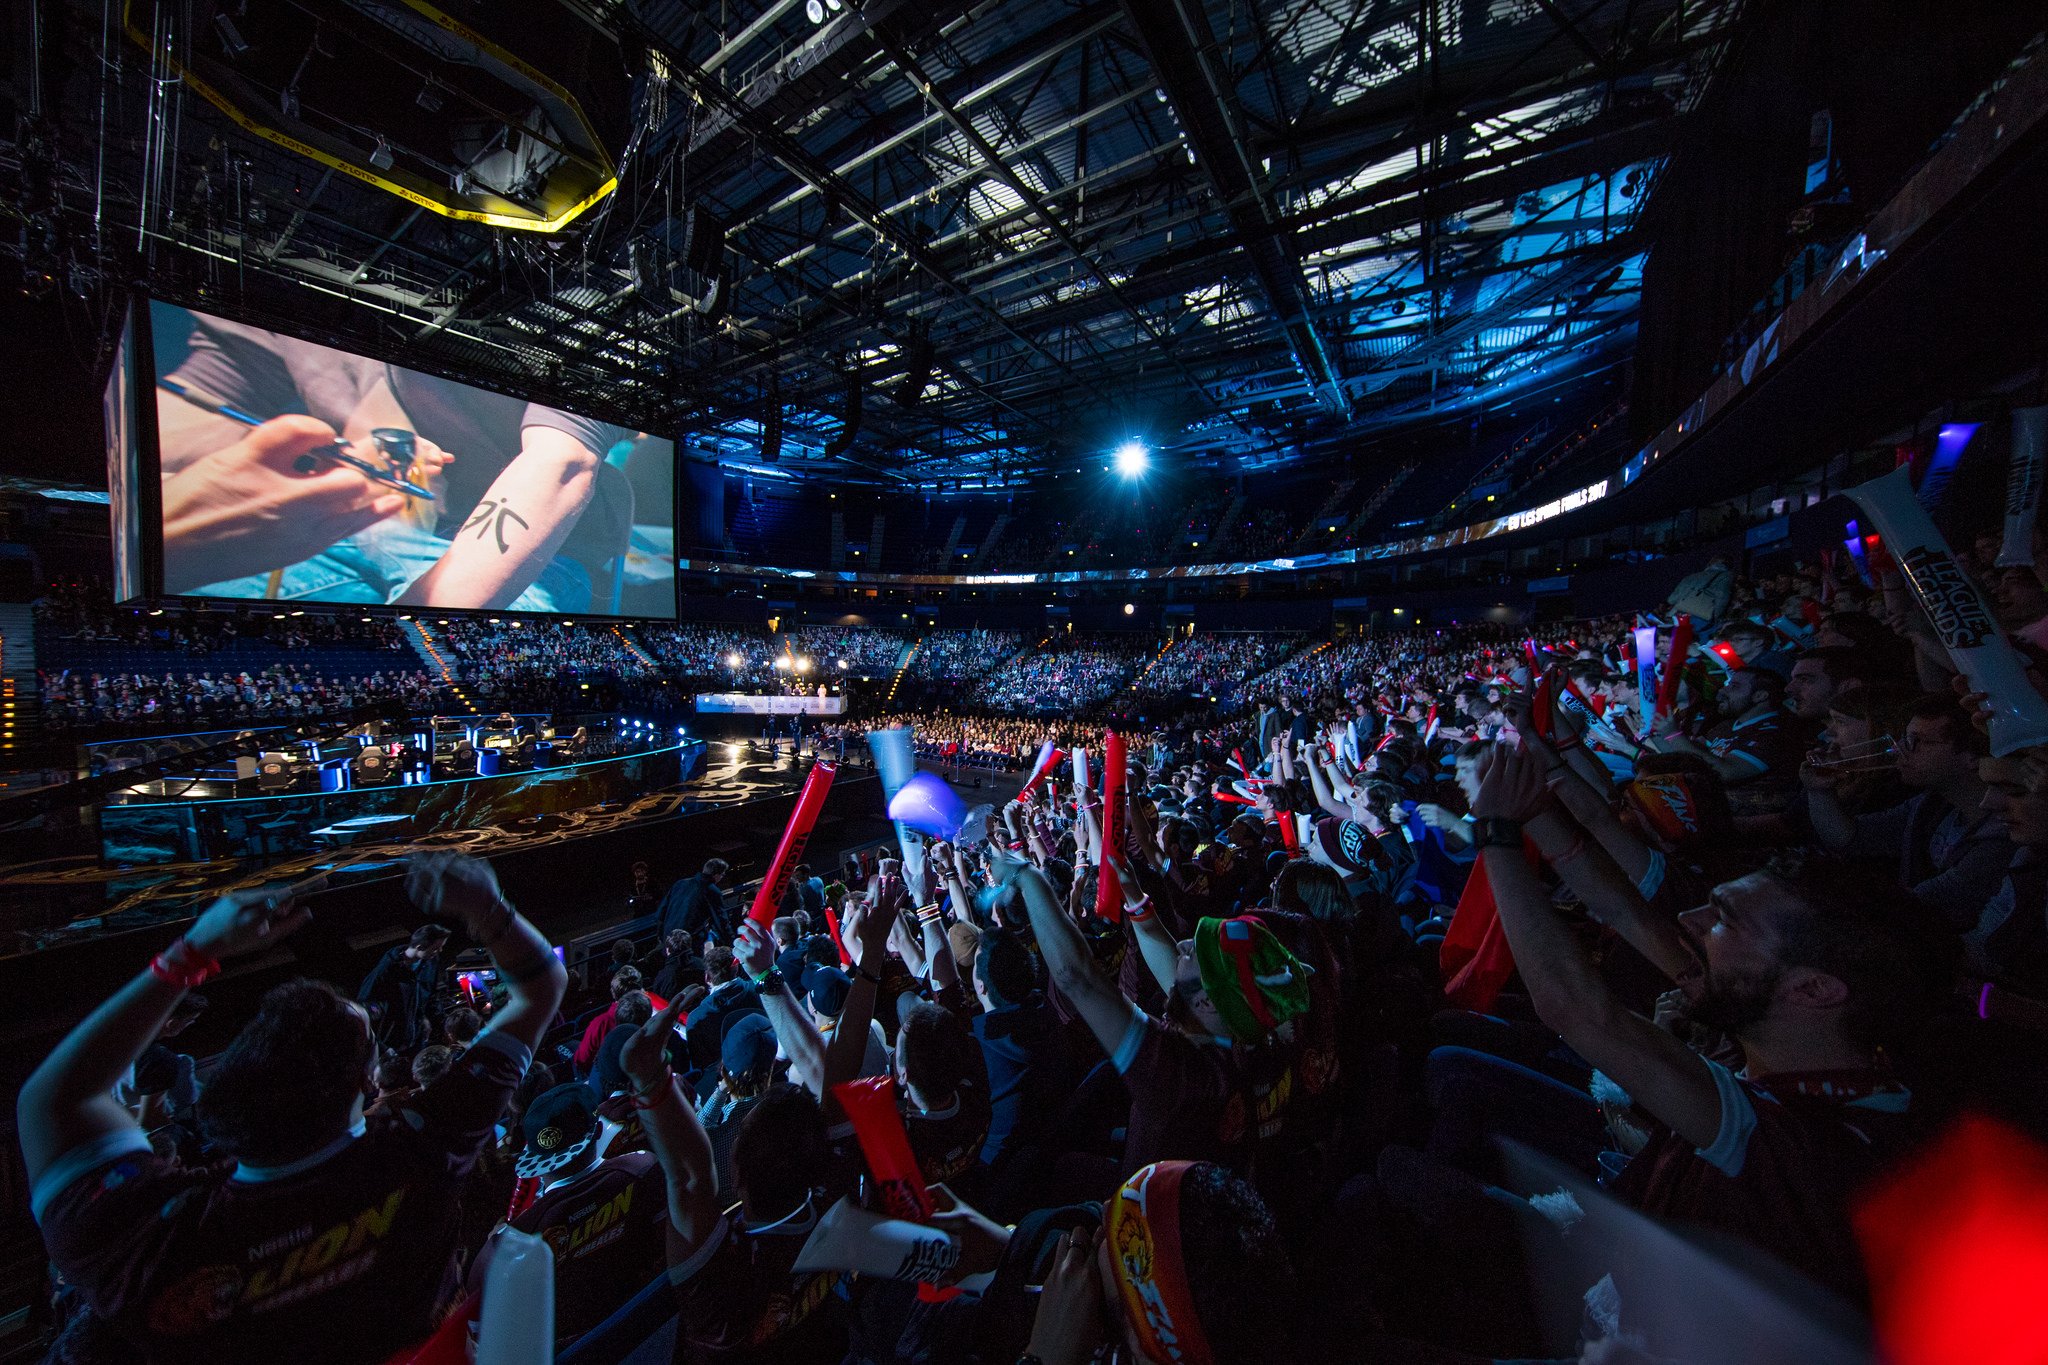 The EU LCS Spring Split Finals will take place in Copenhagen’s Royal